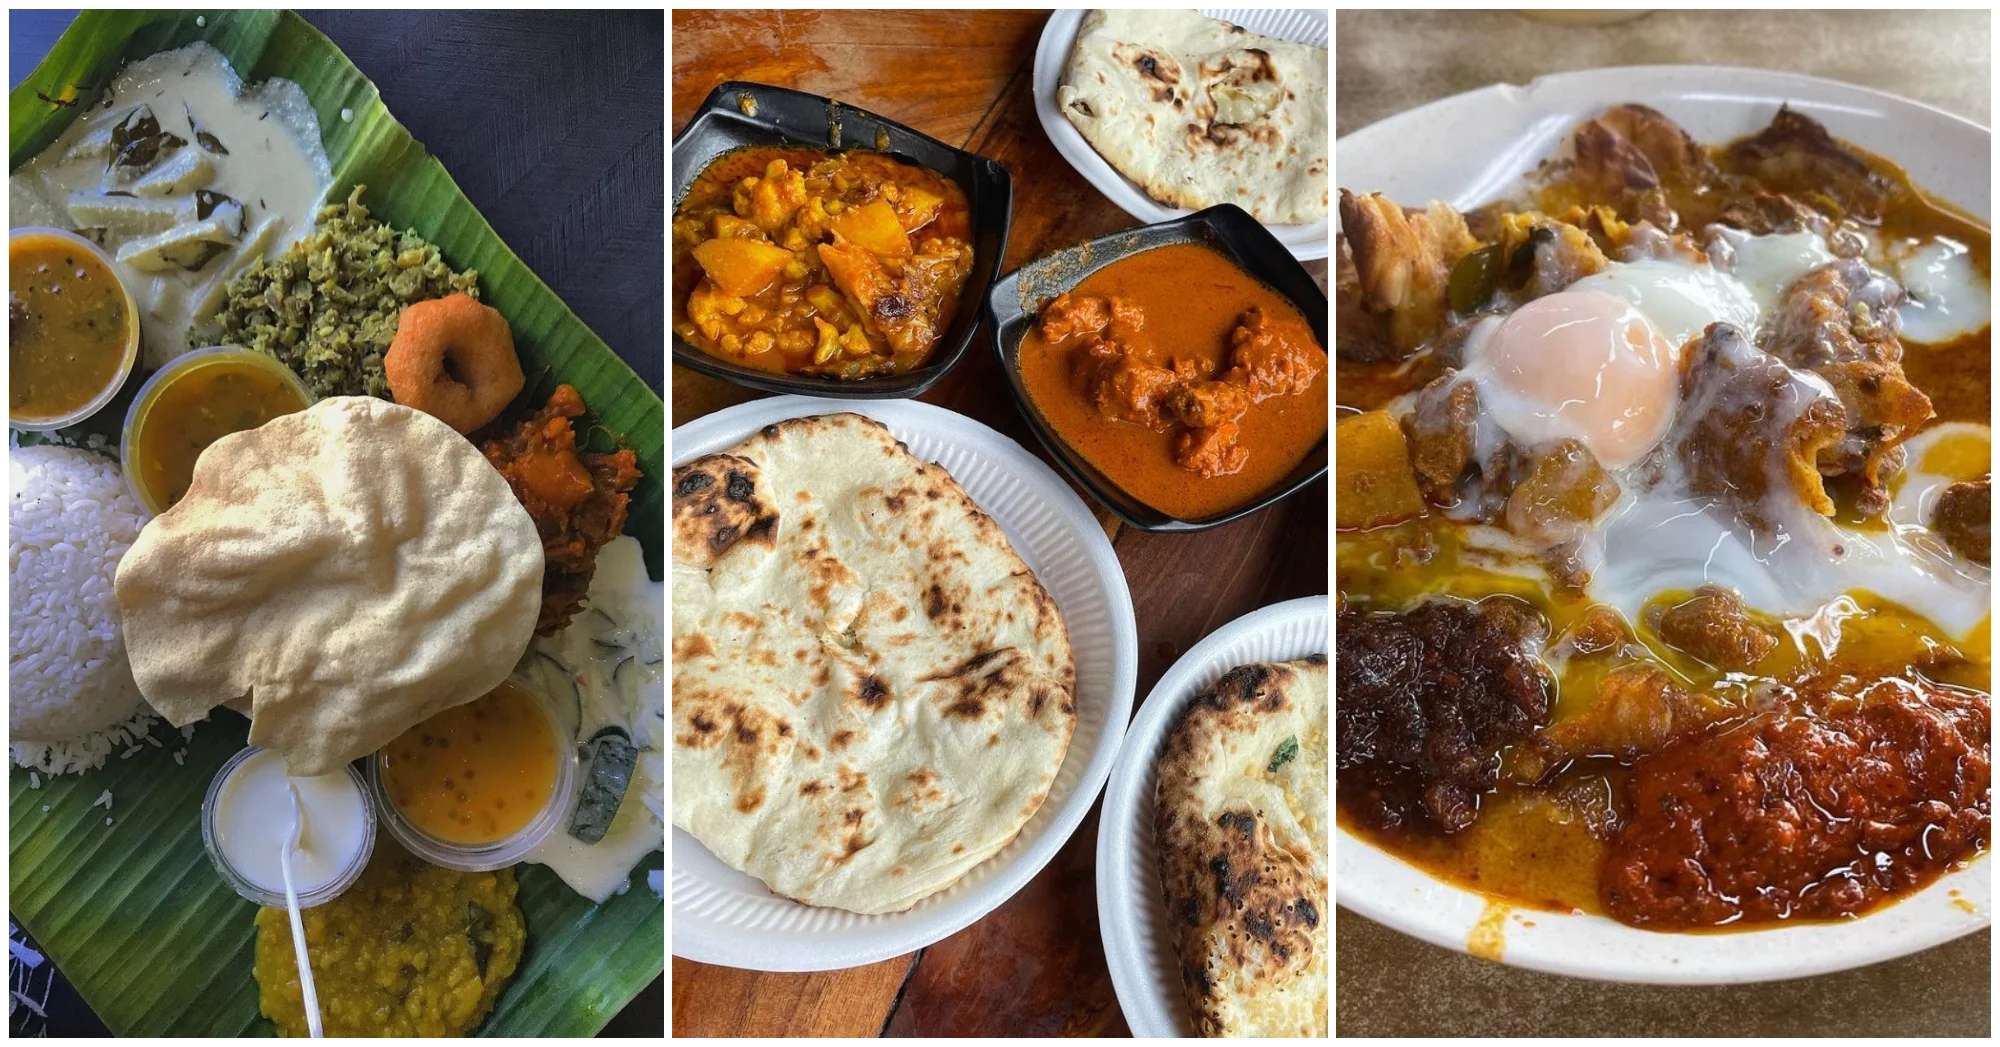 3 pictures showing Indian food